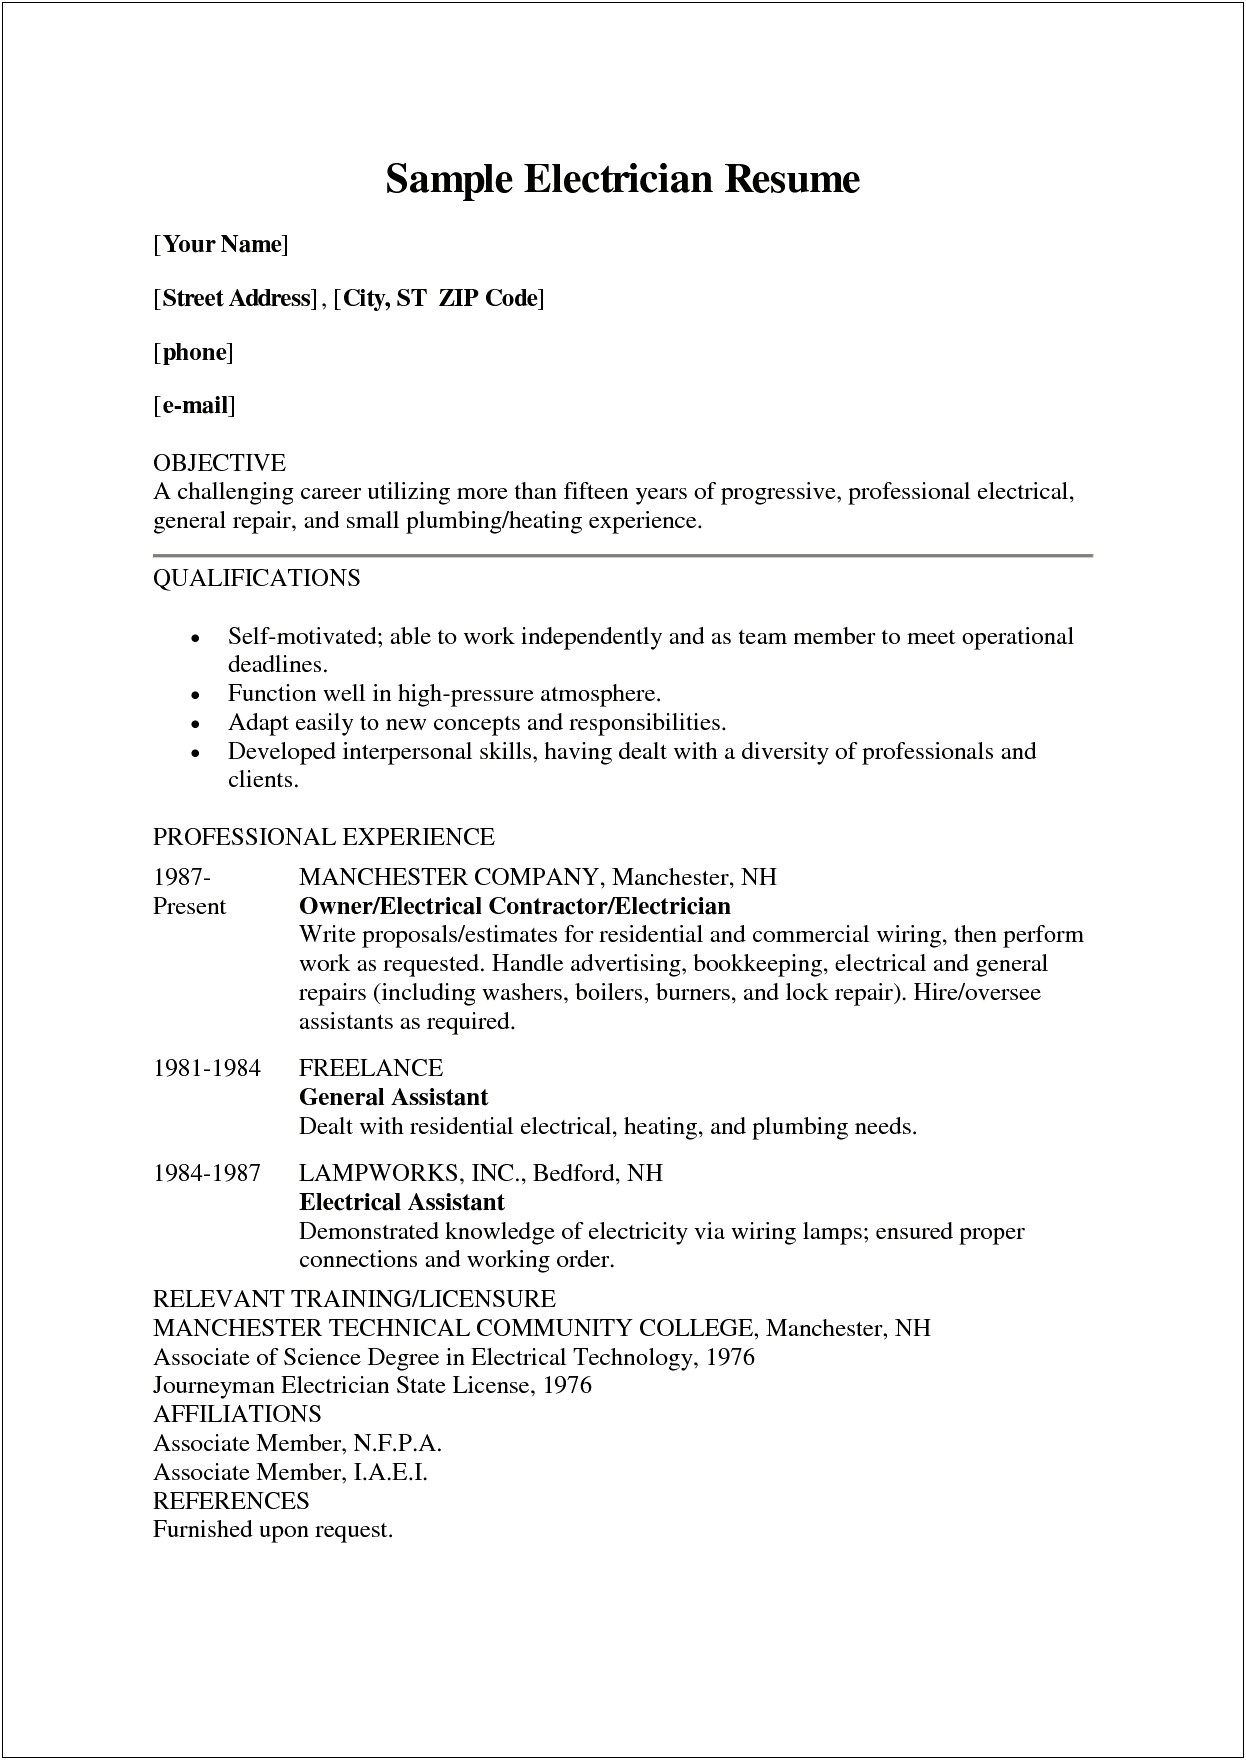 Professional Summary For A Lineman On Resume